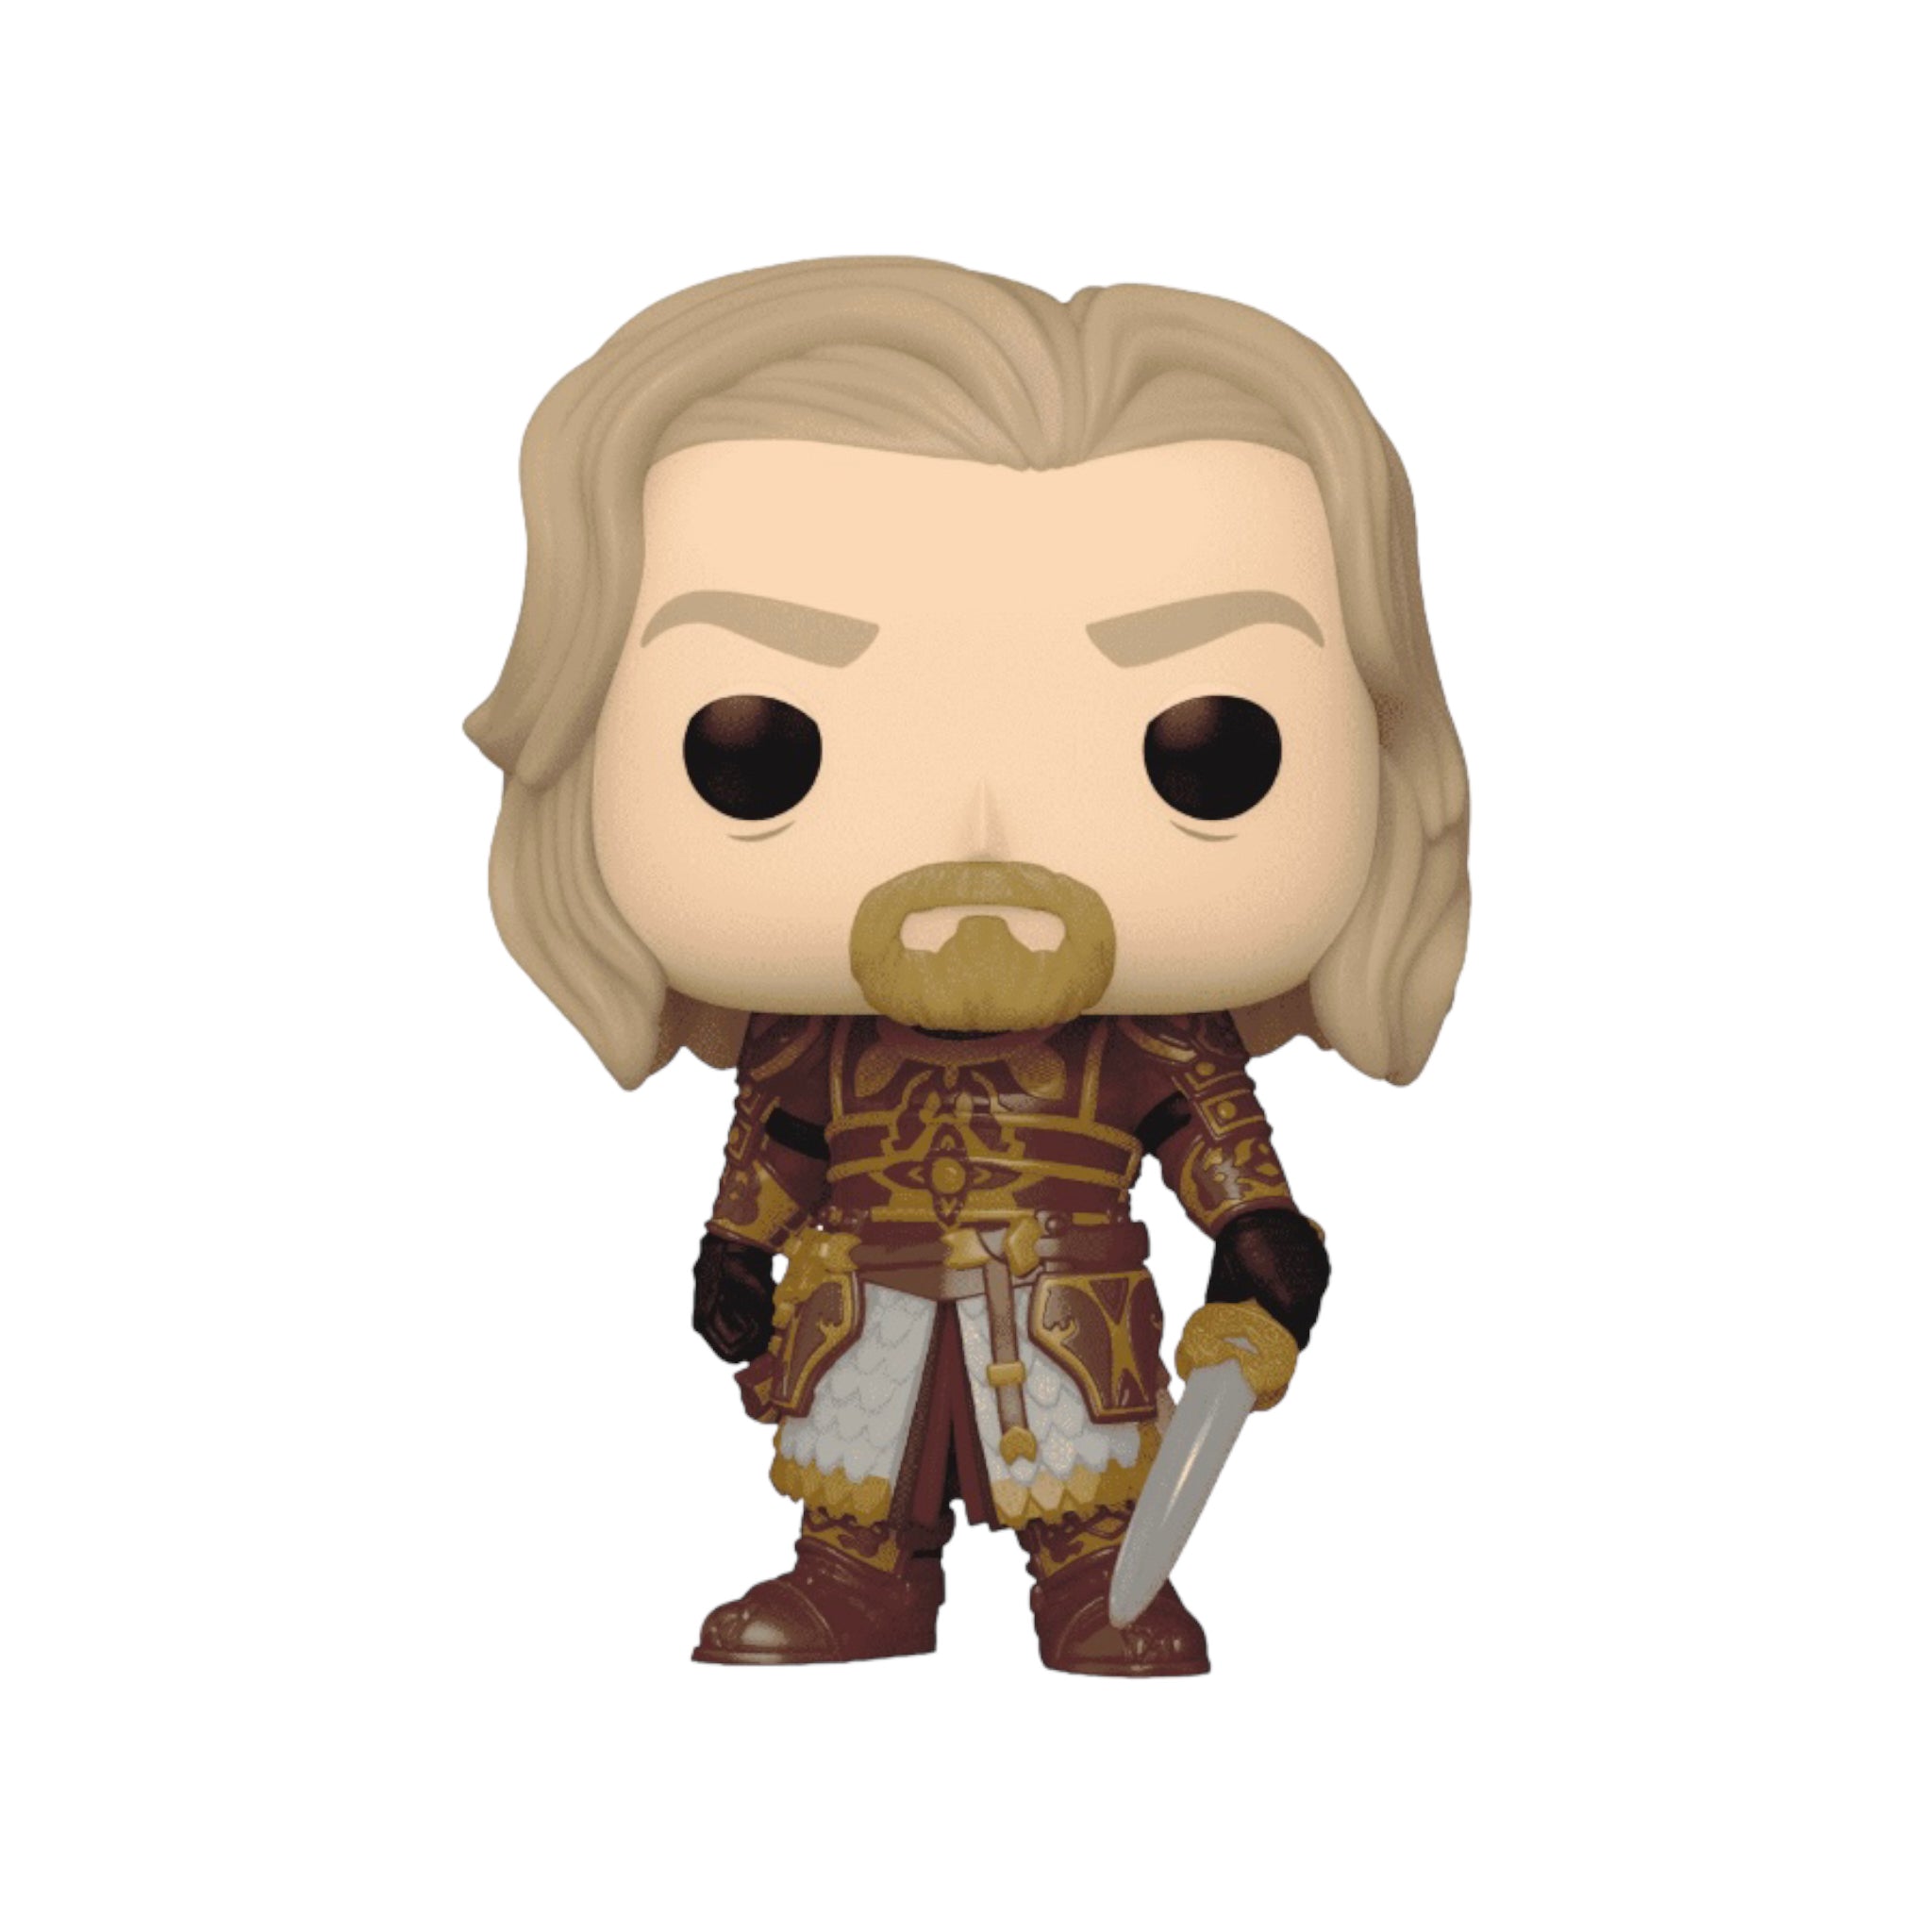 Théoden #1467 Funko Pop! - The Lord of The Rings - Funko Shop Exclusive